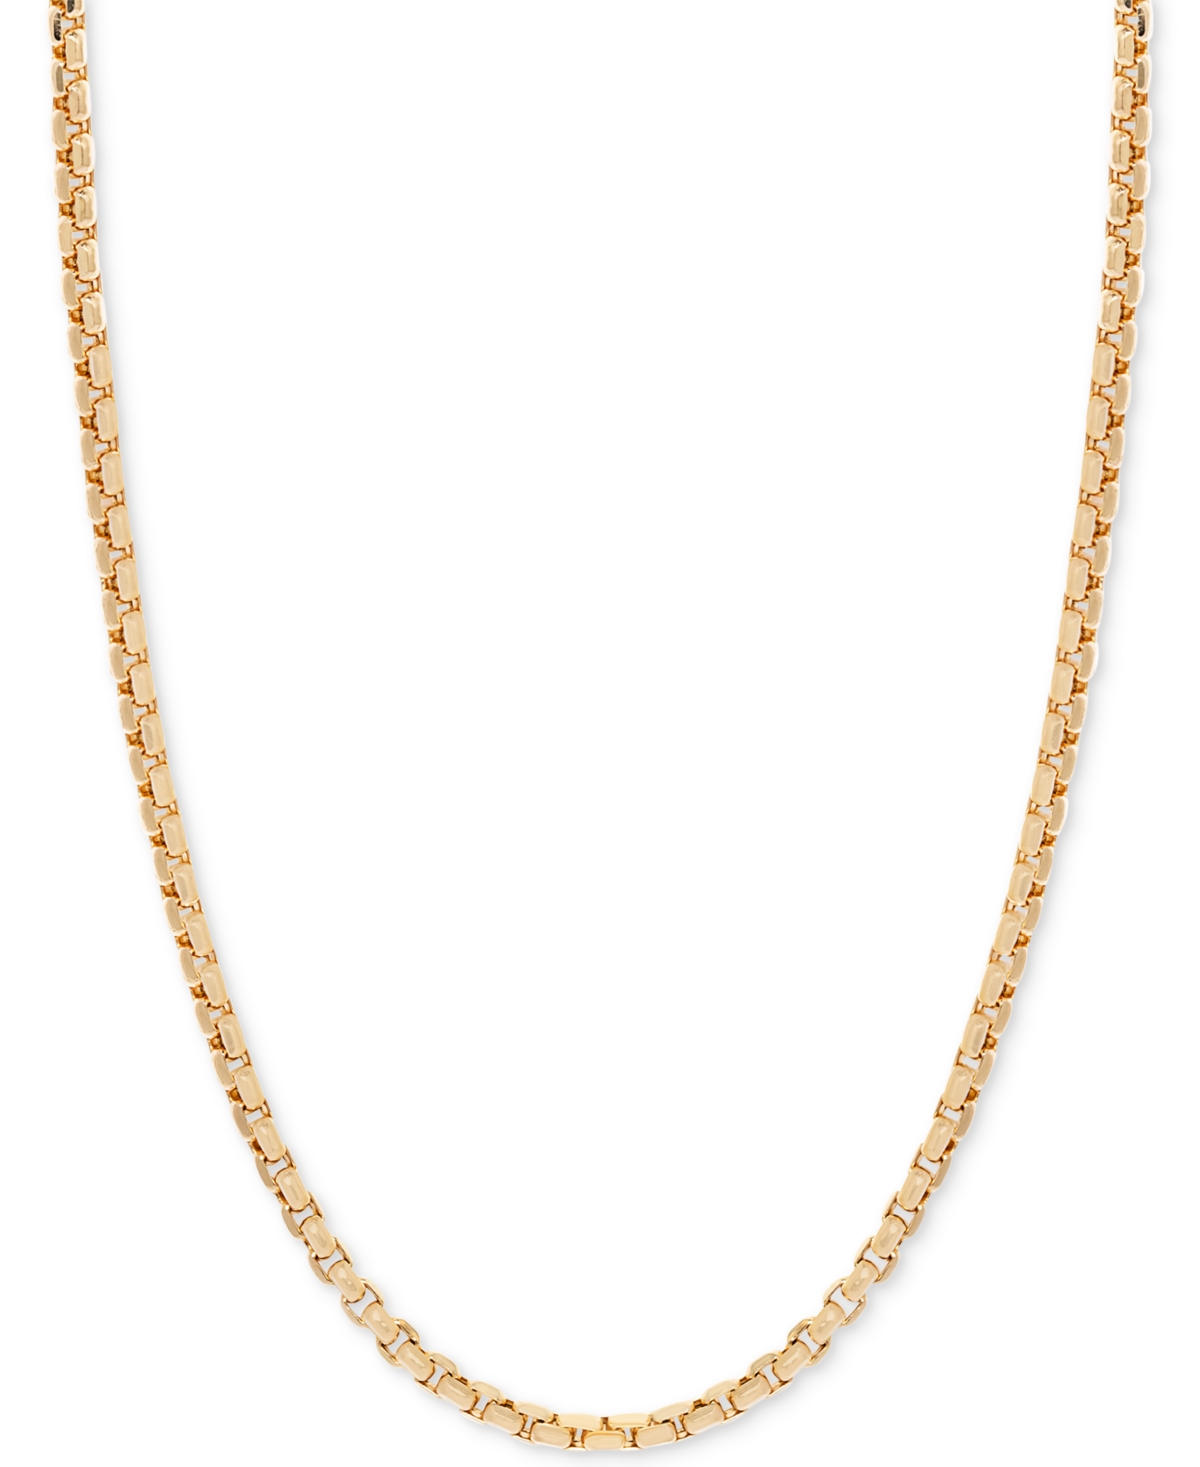 24" Round Box Link Chain Necklace (1-1/2mm) in 14k Gold - Yellow Gold